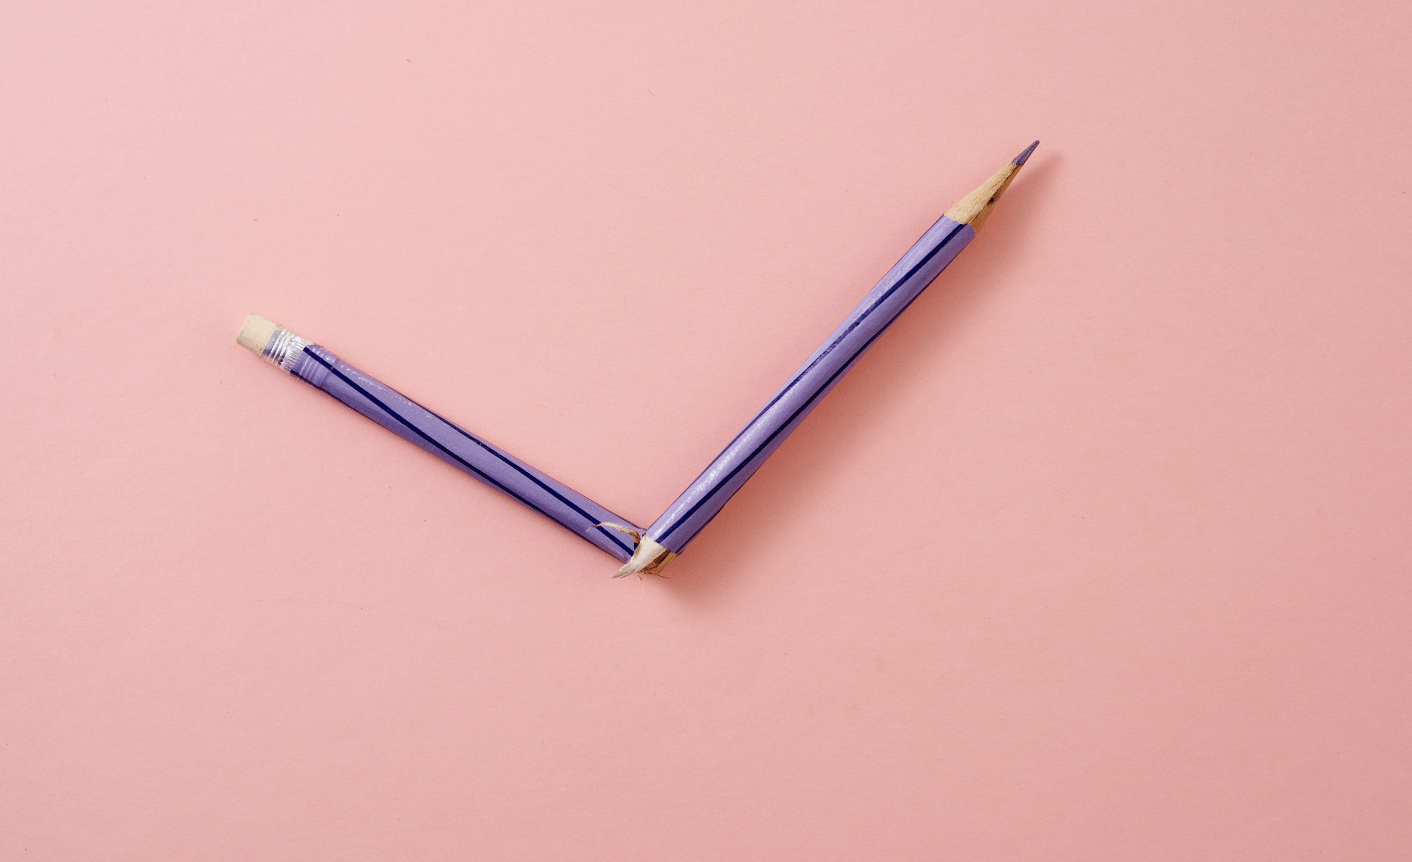 A purple pencil is broken in half on a pink background - to symbolize writing mistakes.